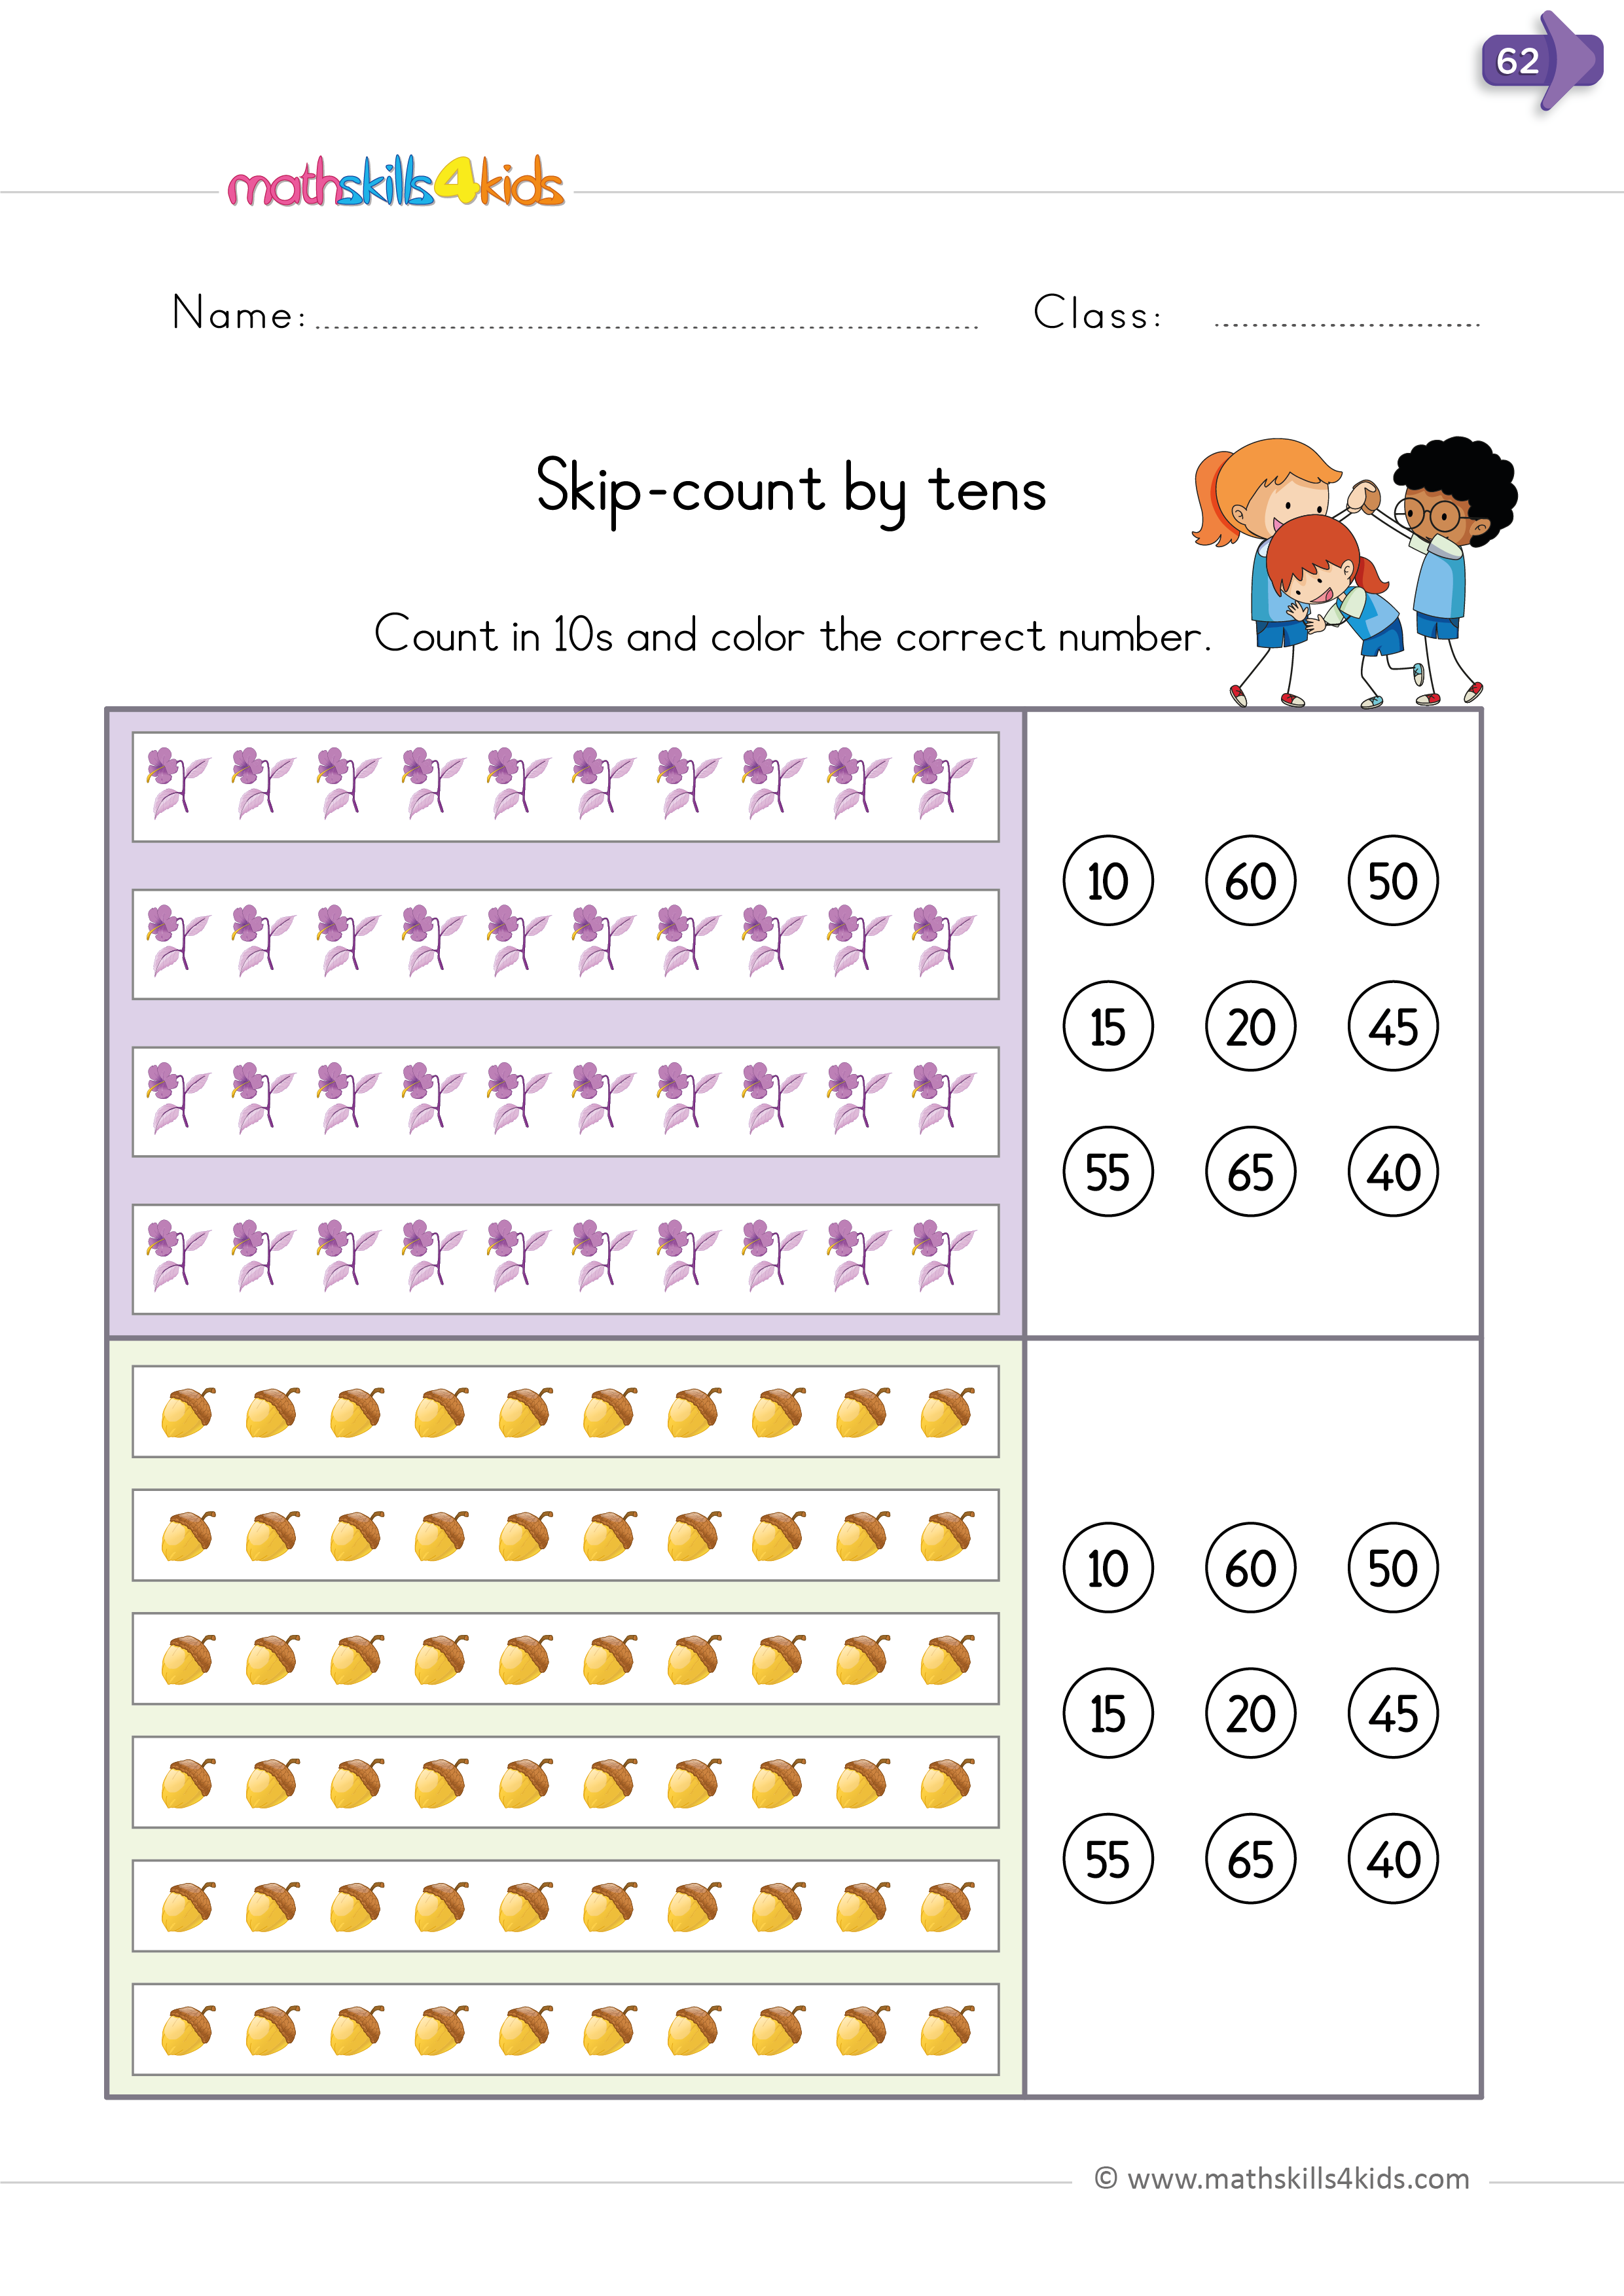 Best way to teach multiplication facts - Counting by 10's